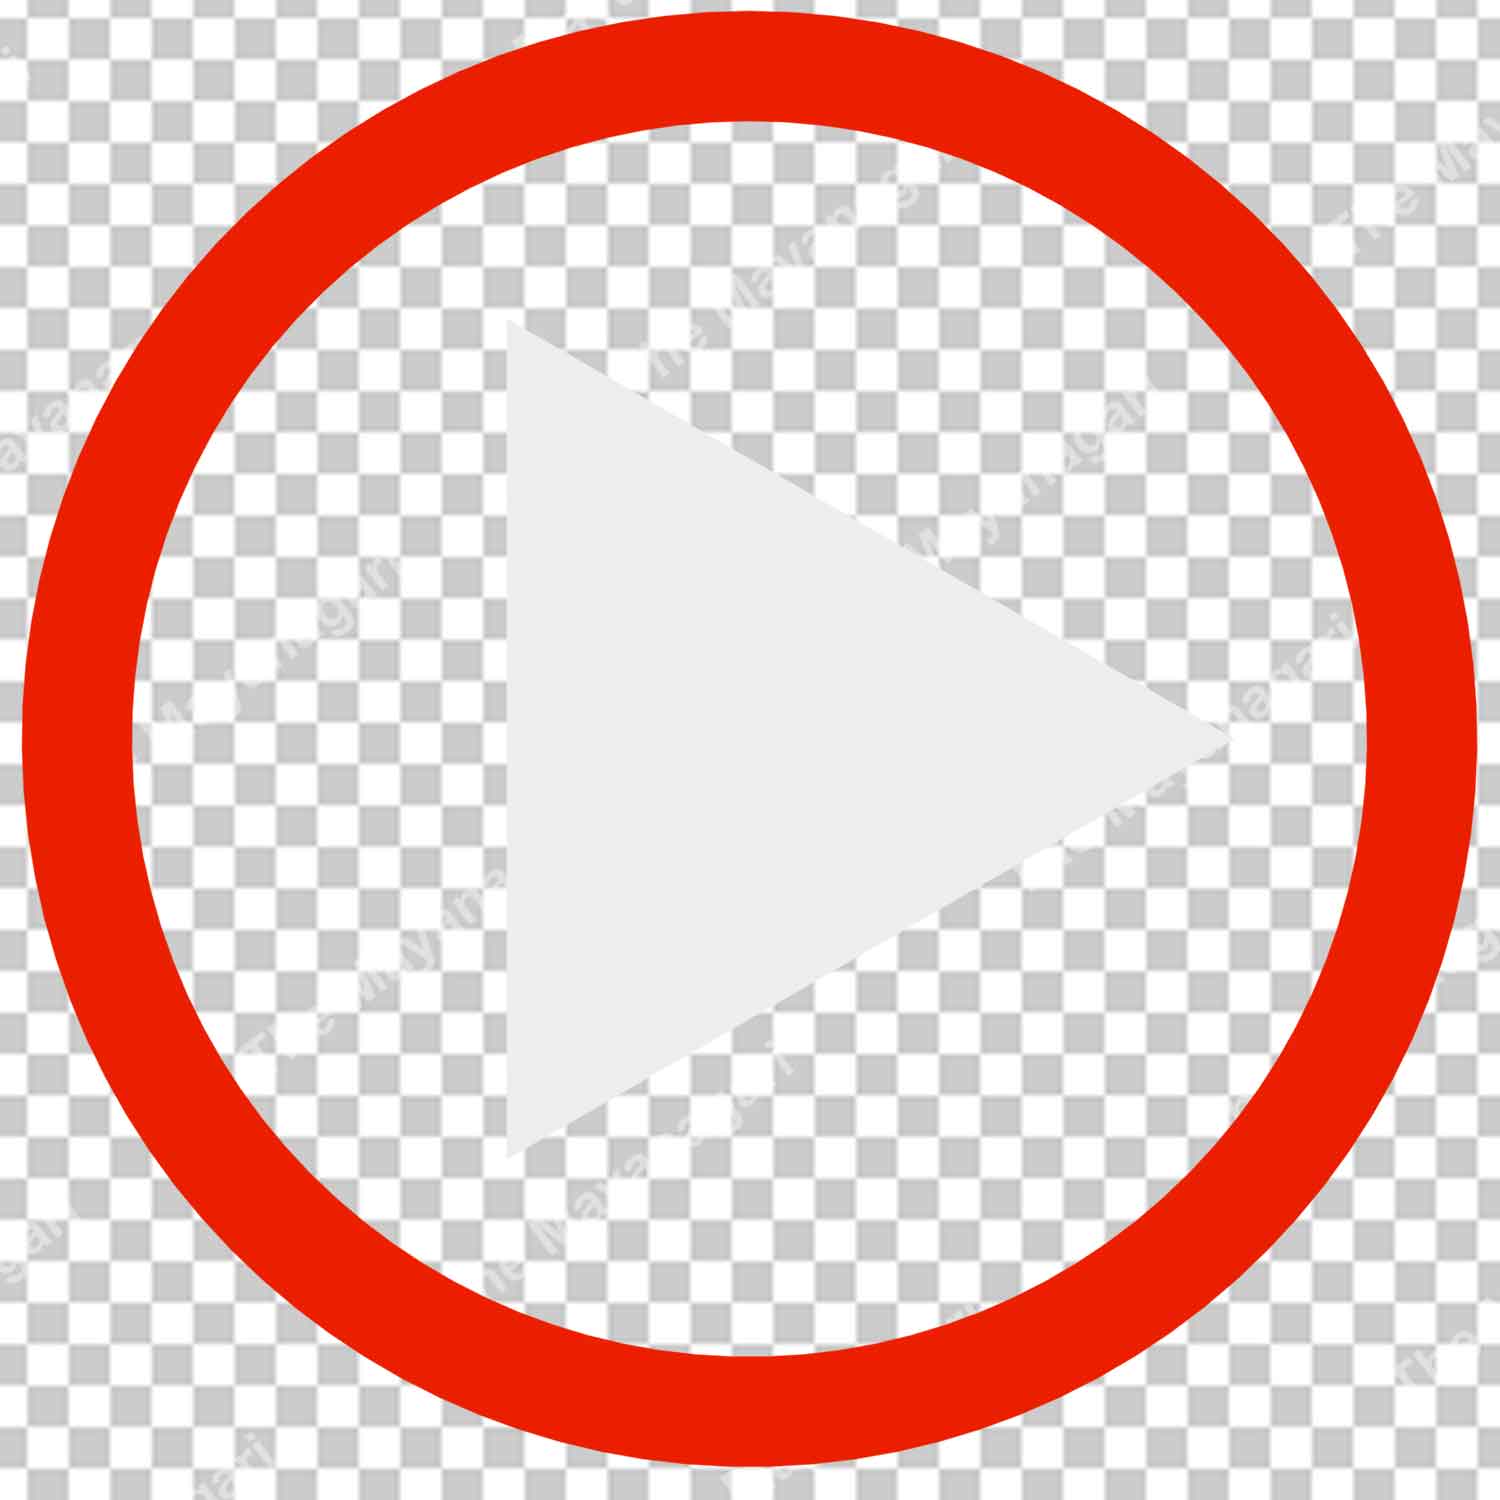 Play button image Png Photo Free Download